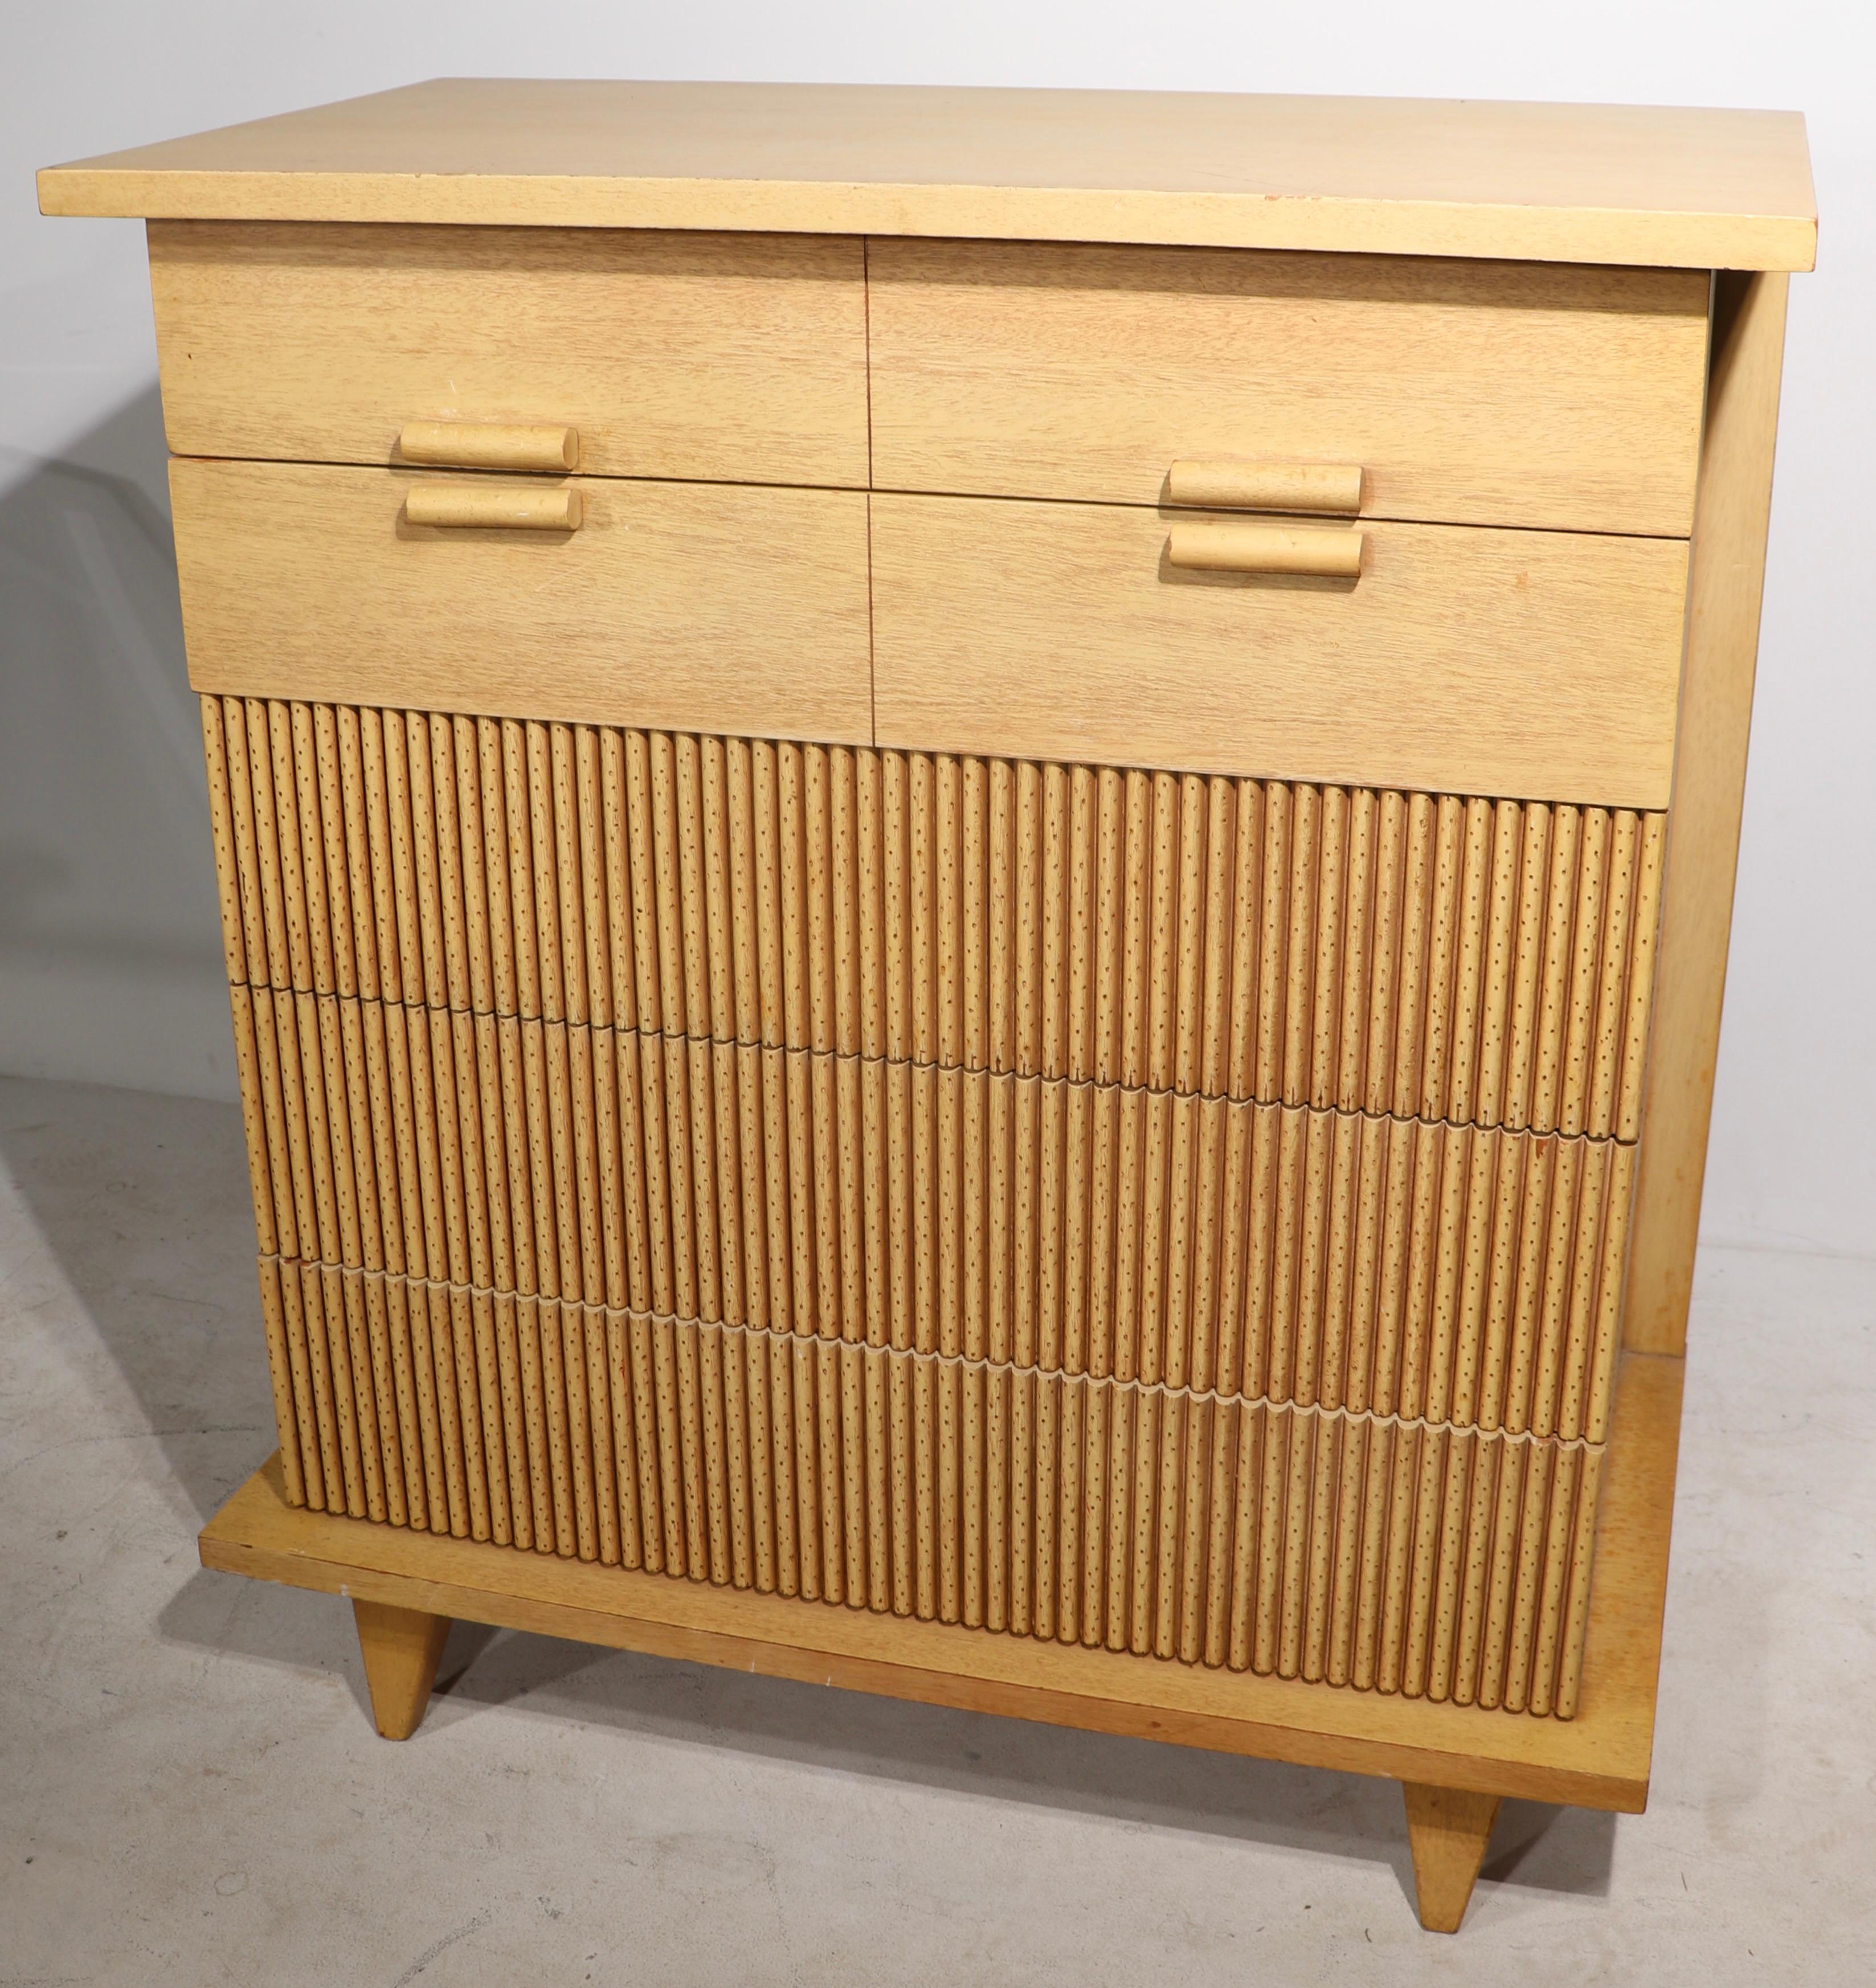 Chic and stylish 5 drawer dresser in bleached mahogany with decorative faux bamboo front. The chest features an architecturally inspired case, which surrounds the drawer fronts, creating a dimensional design element to the cabinet. From the sought